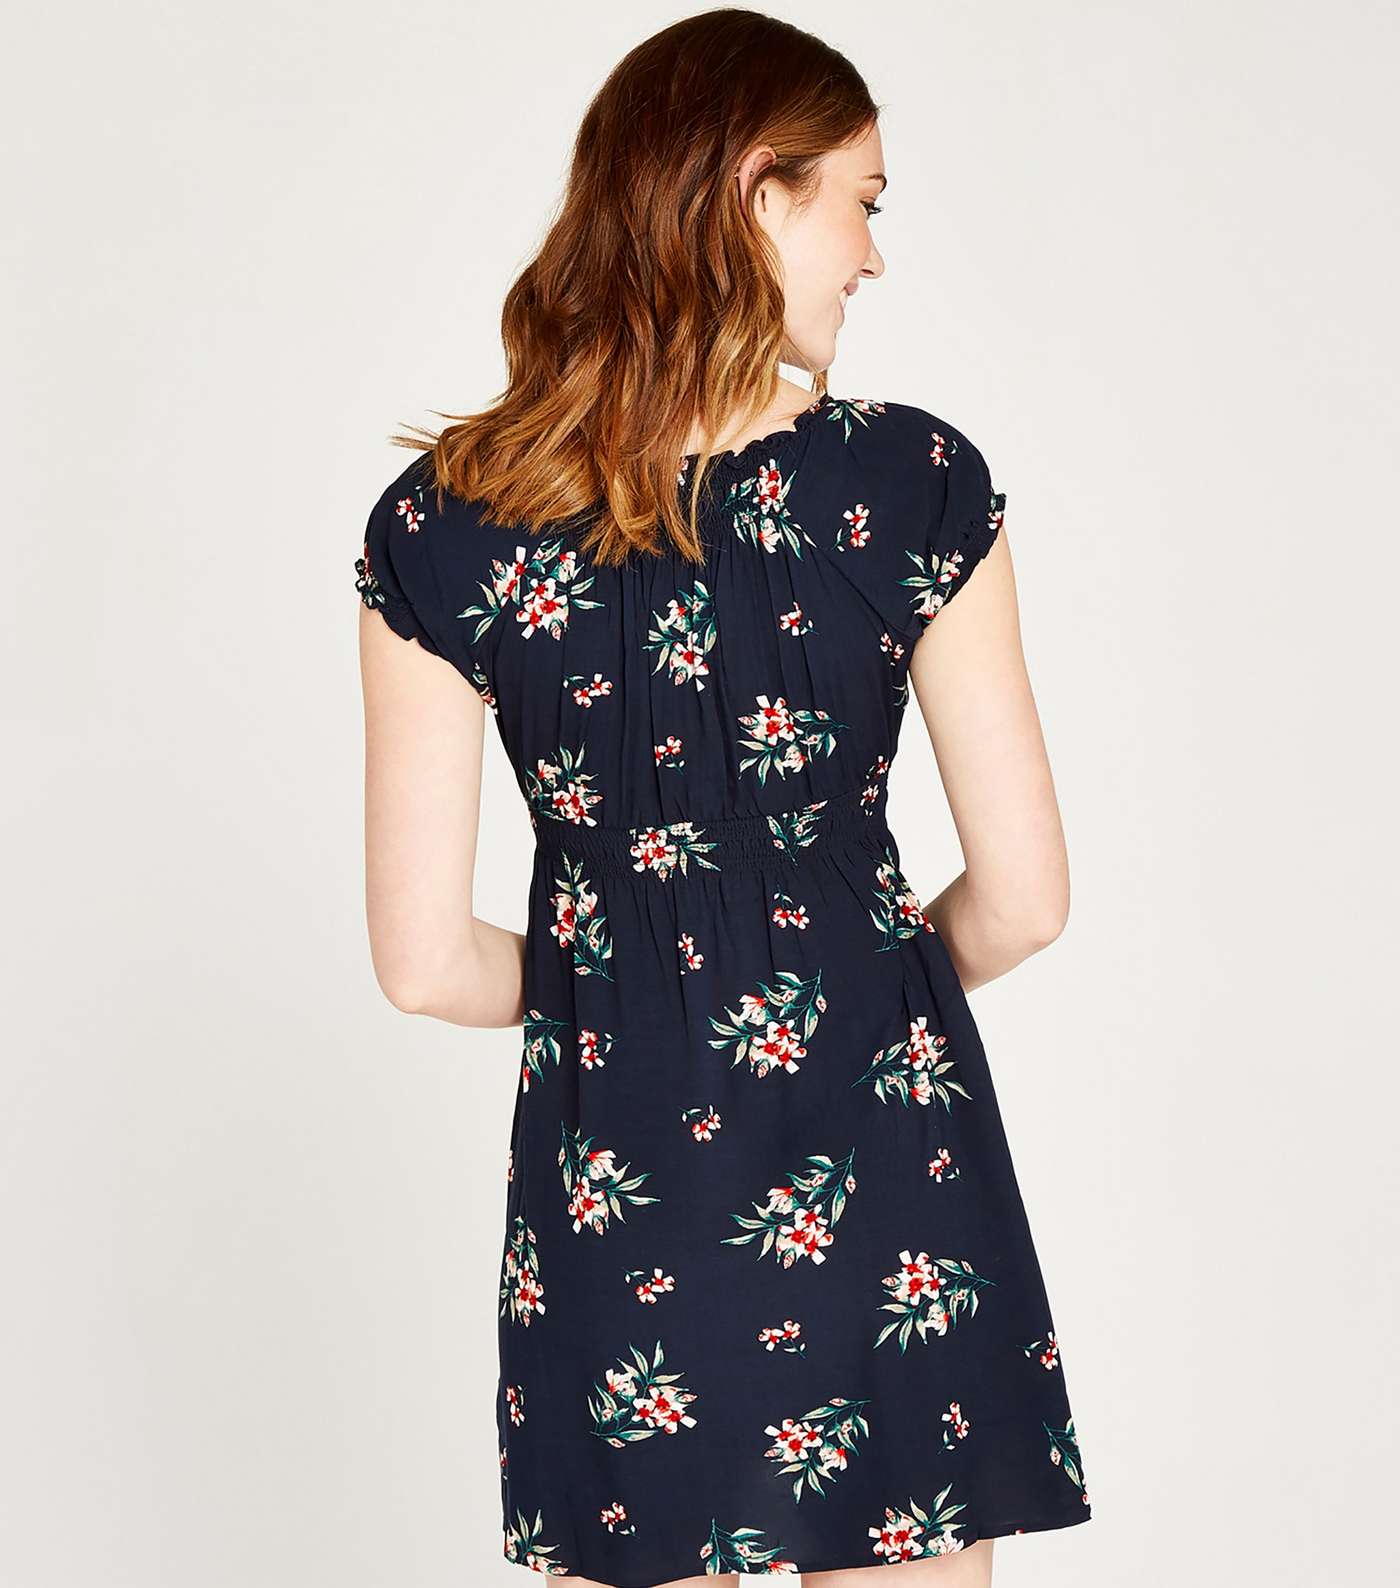 Apricot Navy Floral Milkmaid Dress Image 2